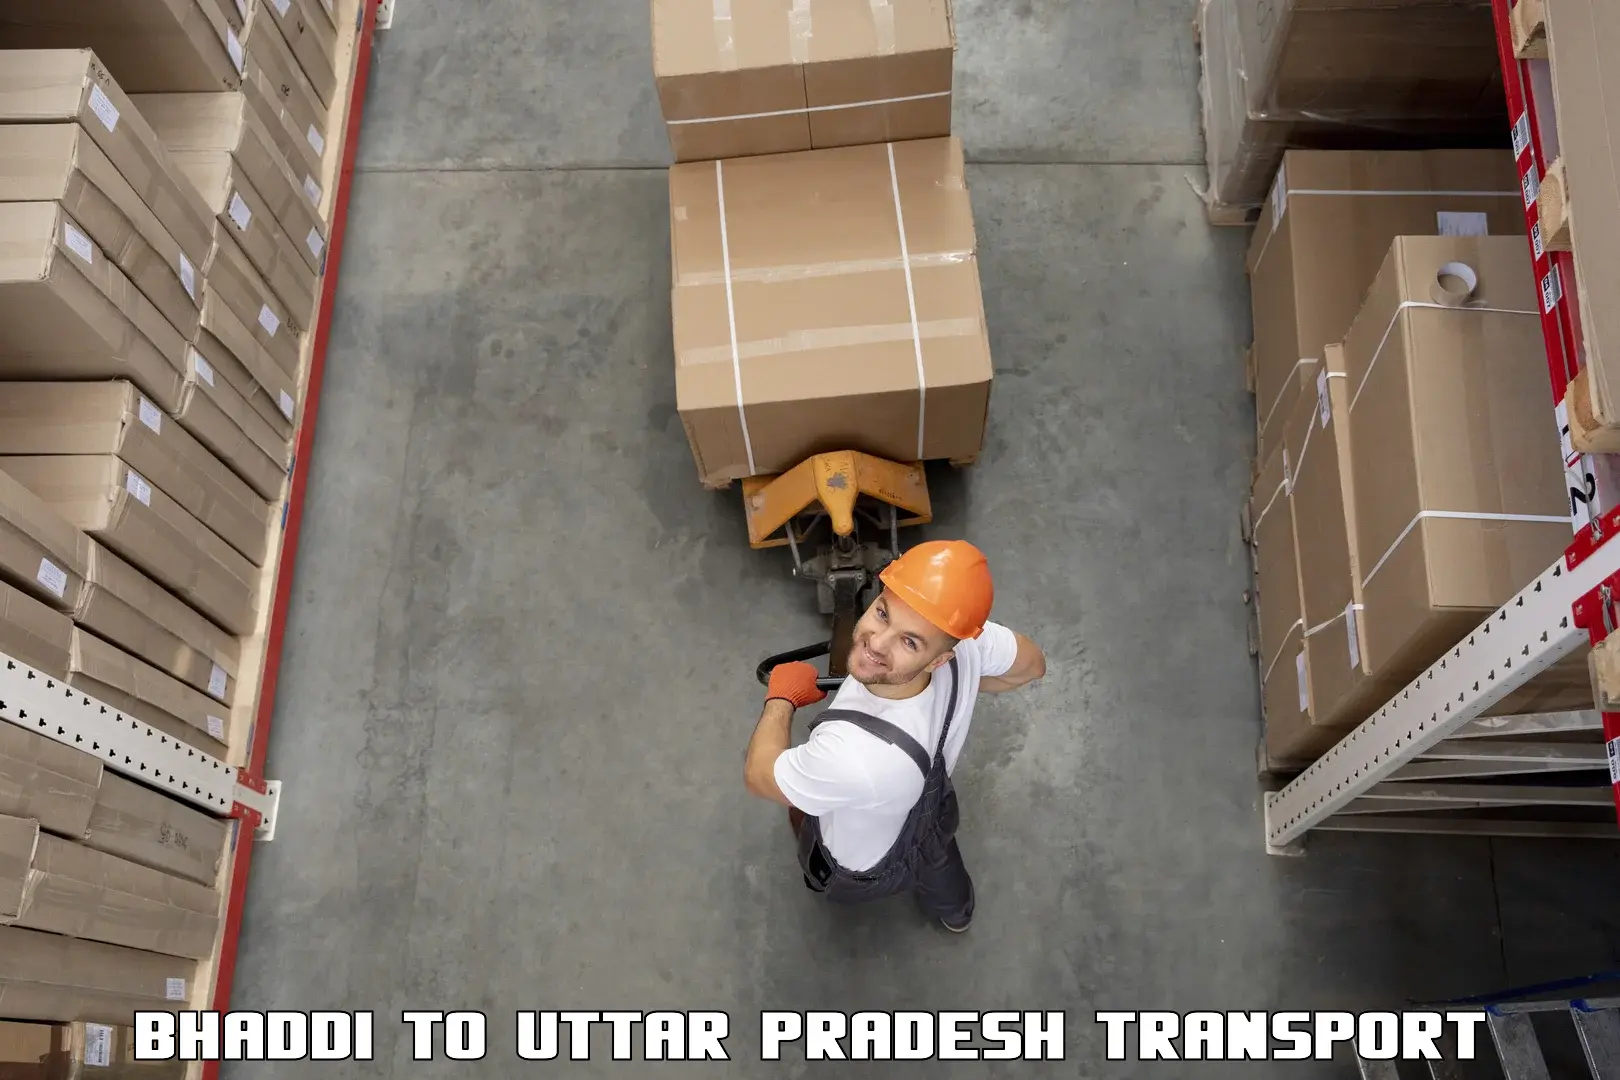 Daily parcel service transport Bhaddi to Jiyanpur